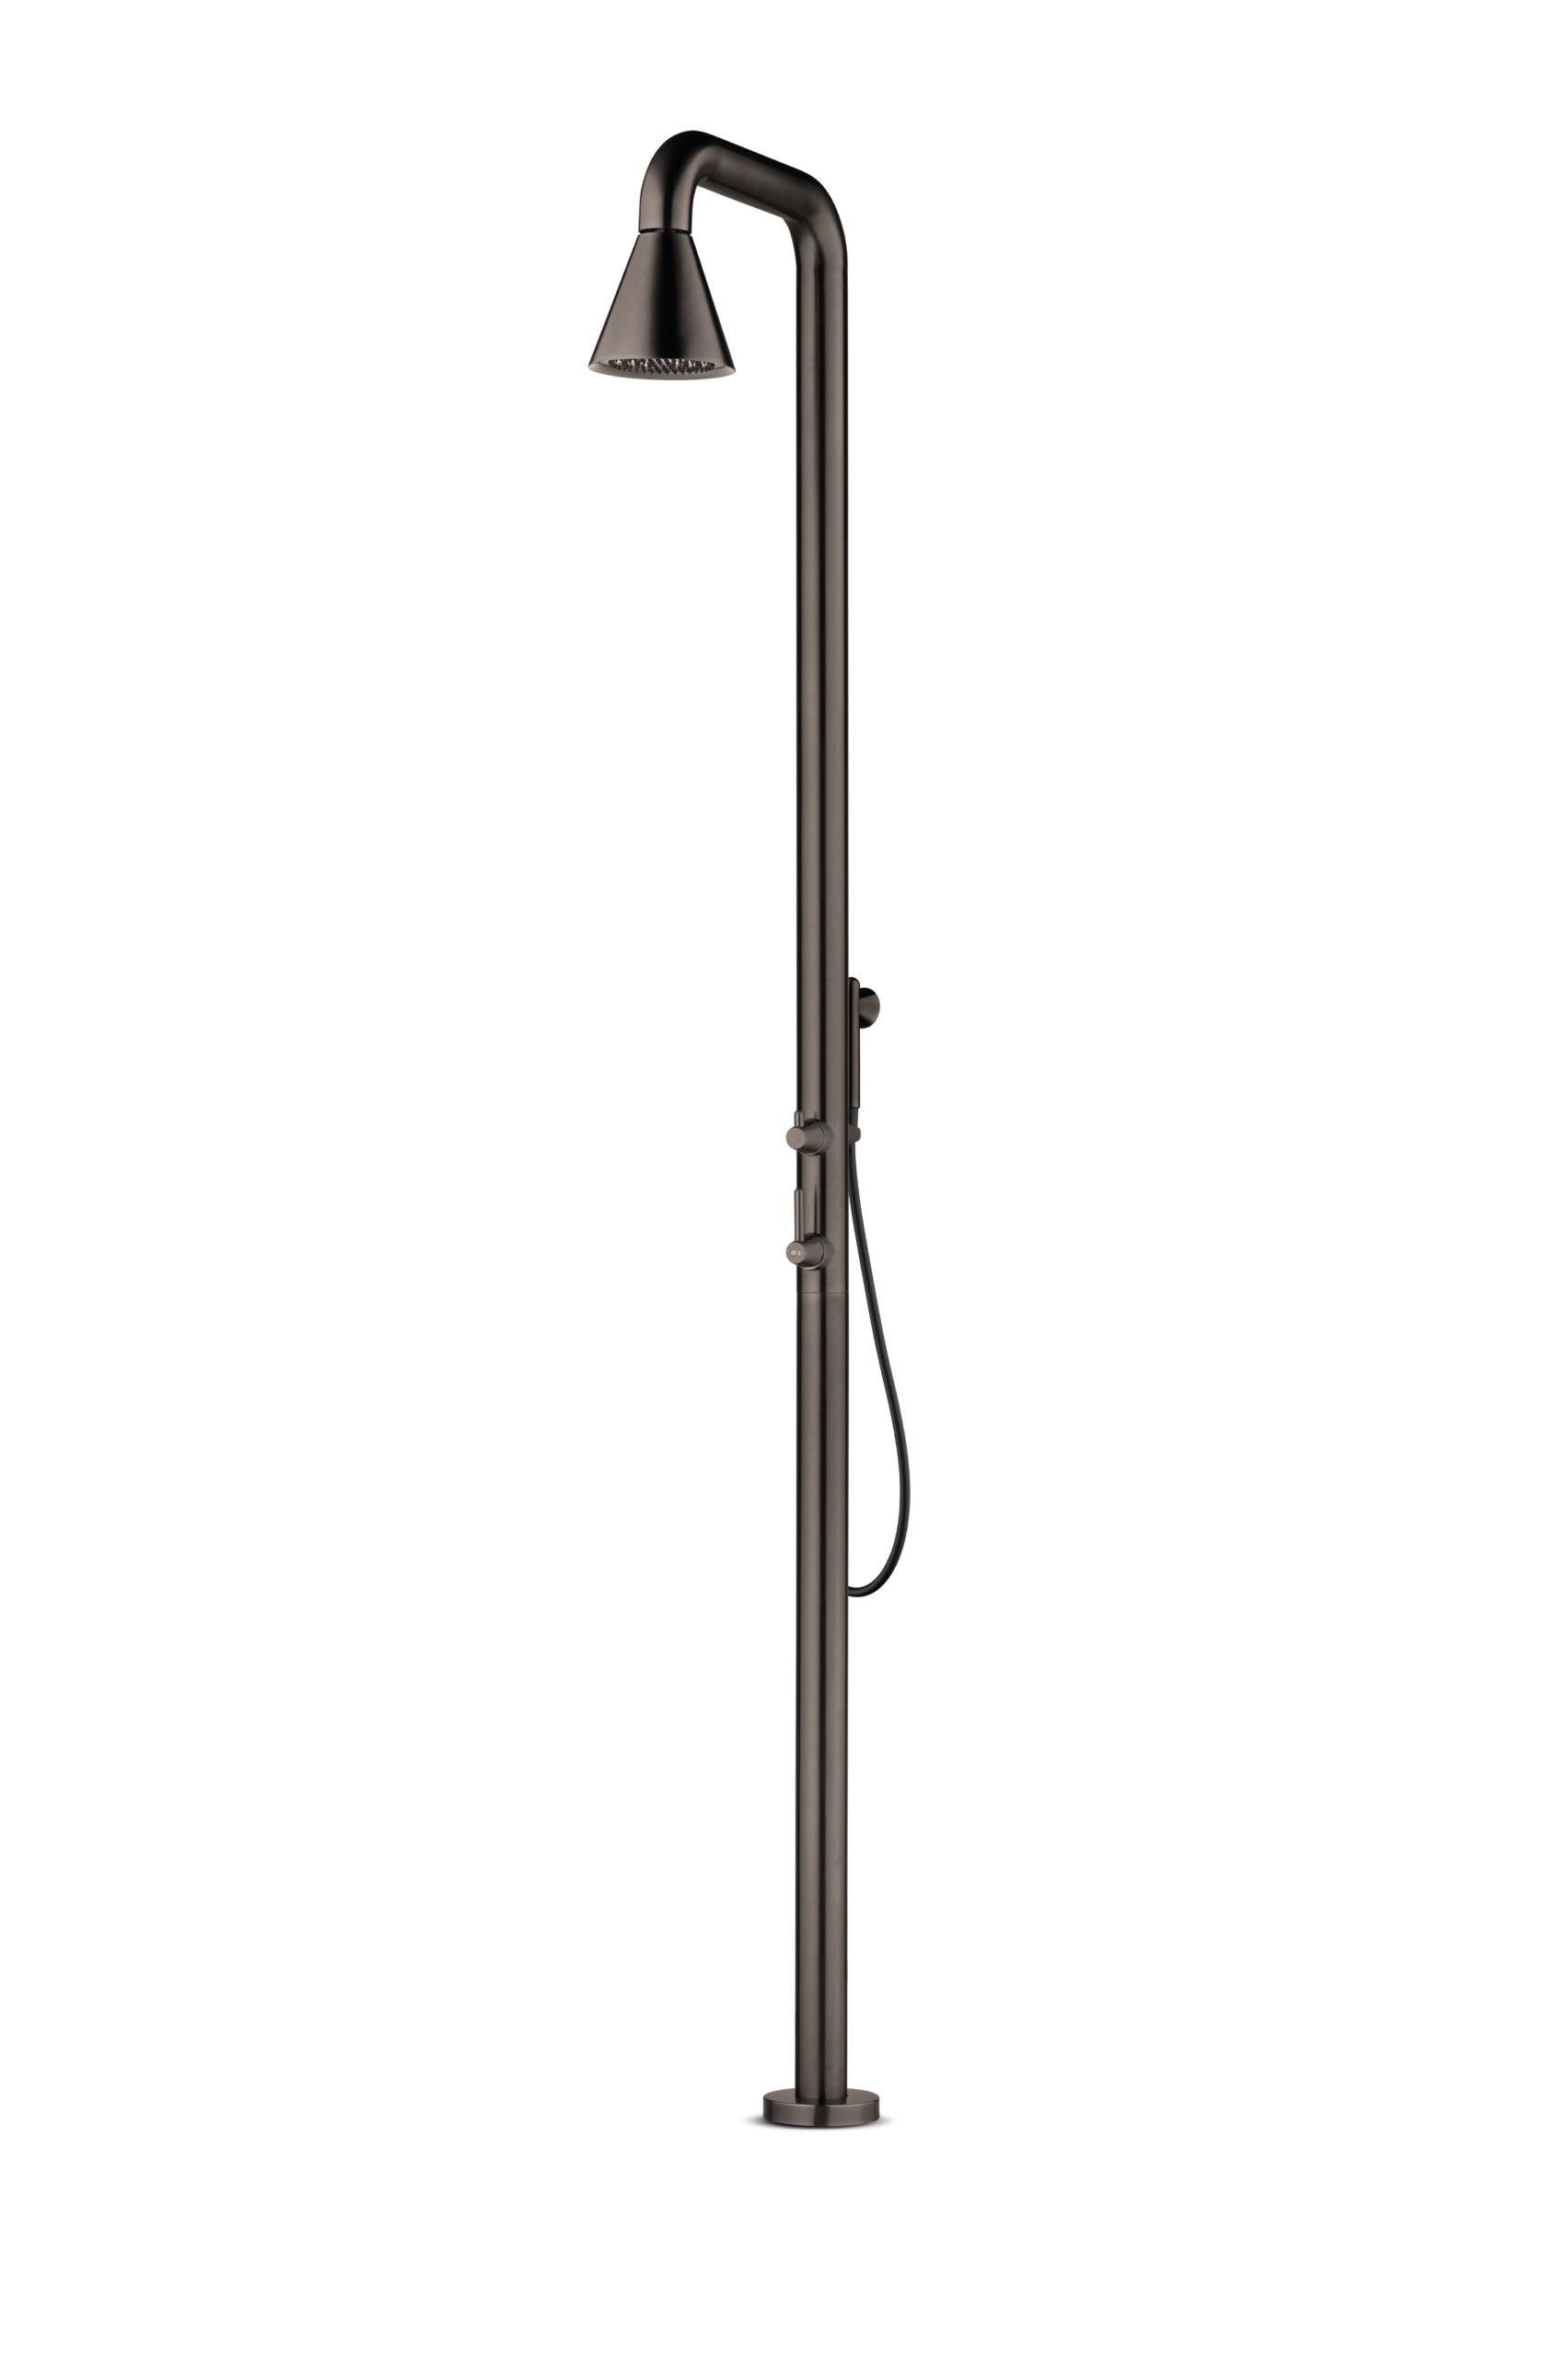 JEE-O Cone Shower 02 Freestanding Stainless Steel with Hand Shower